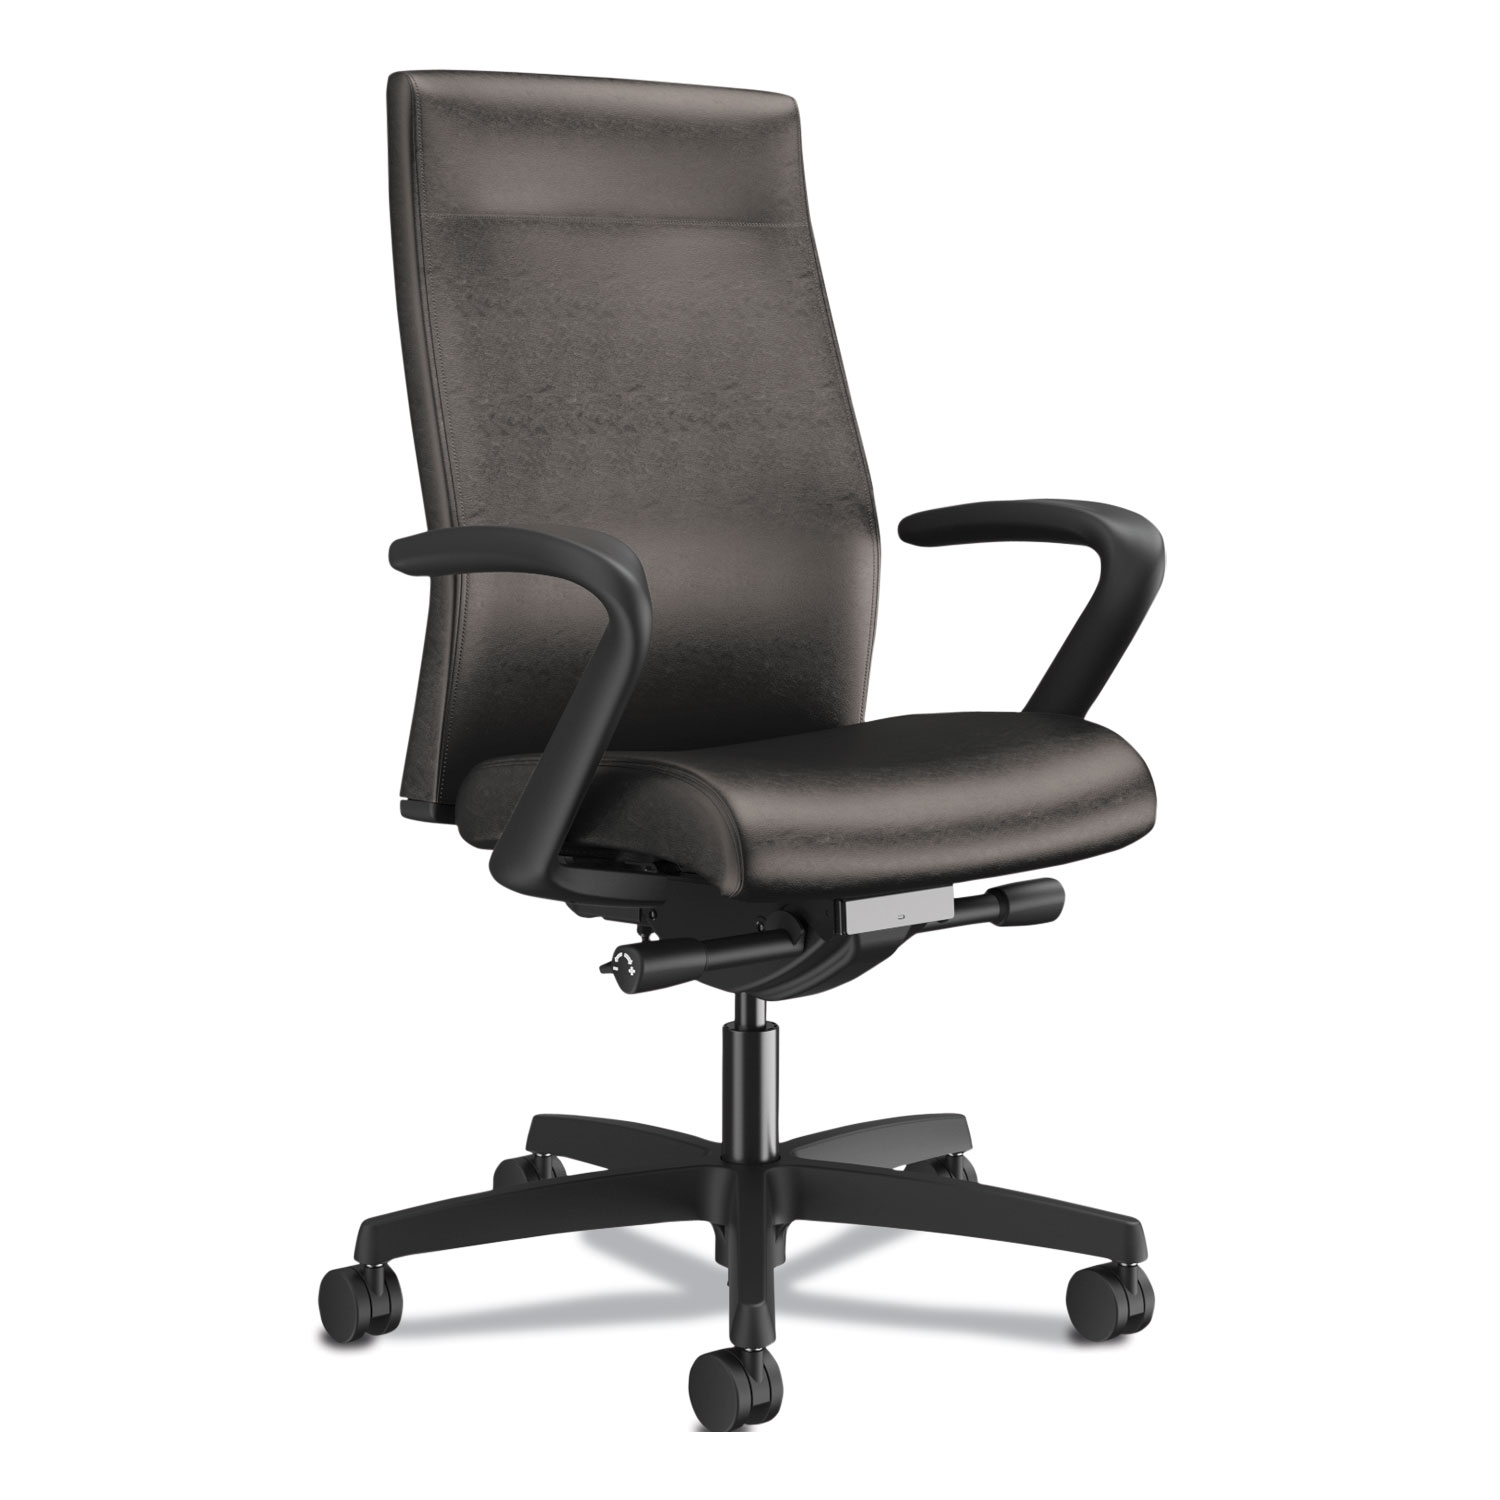  HON HONI2UL2FU10TK Ignition 2.0 Upholstered Mid-Back Task Chair, Supports up to 300 lbs., Black Seat, Black Back, Black Base (HONI2UL2FU10TK) 